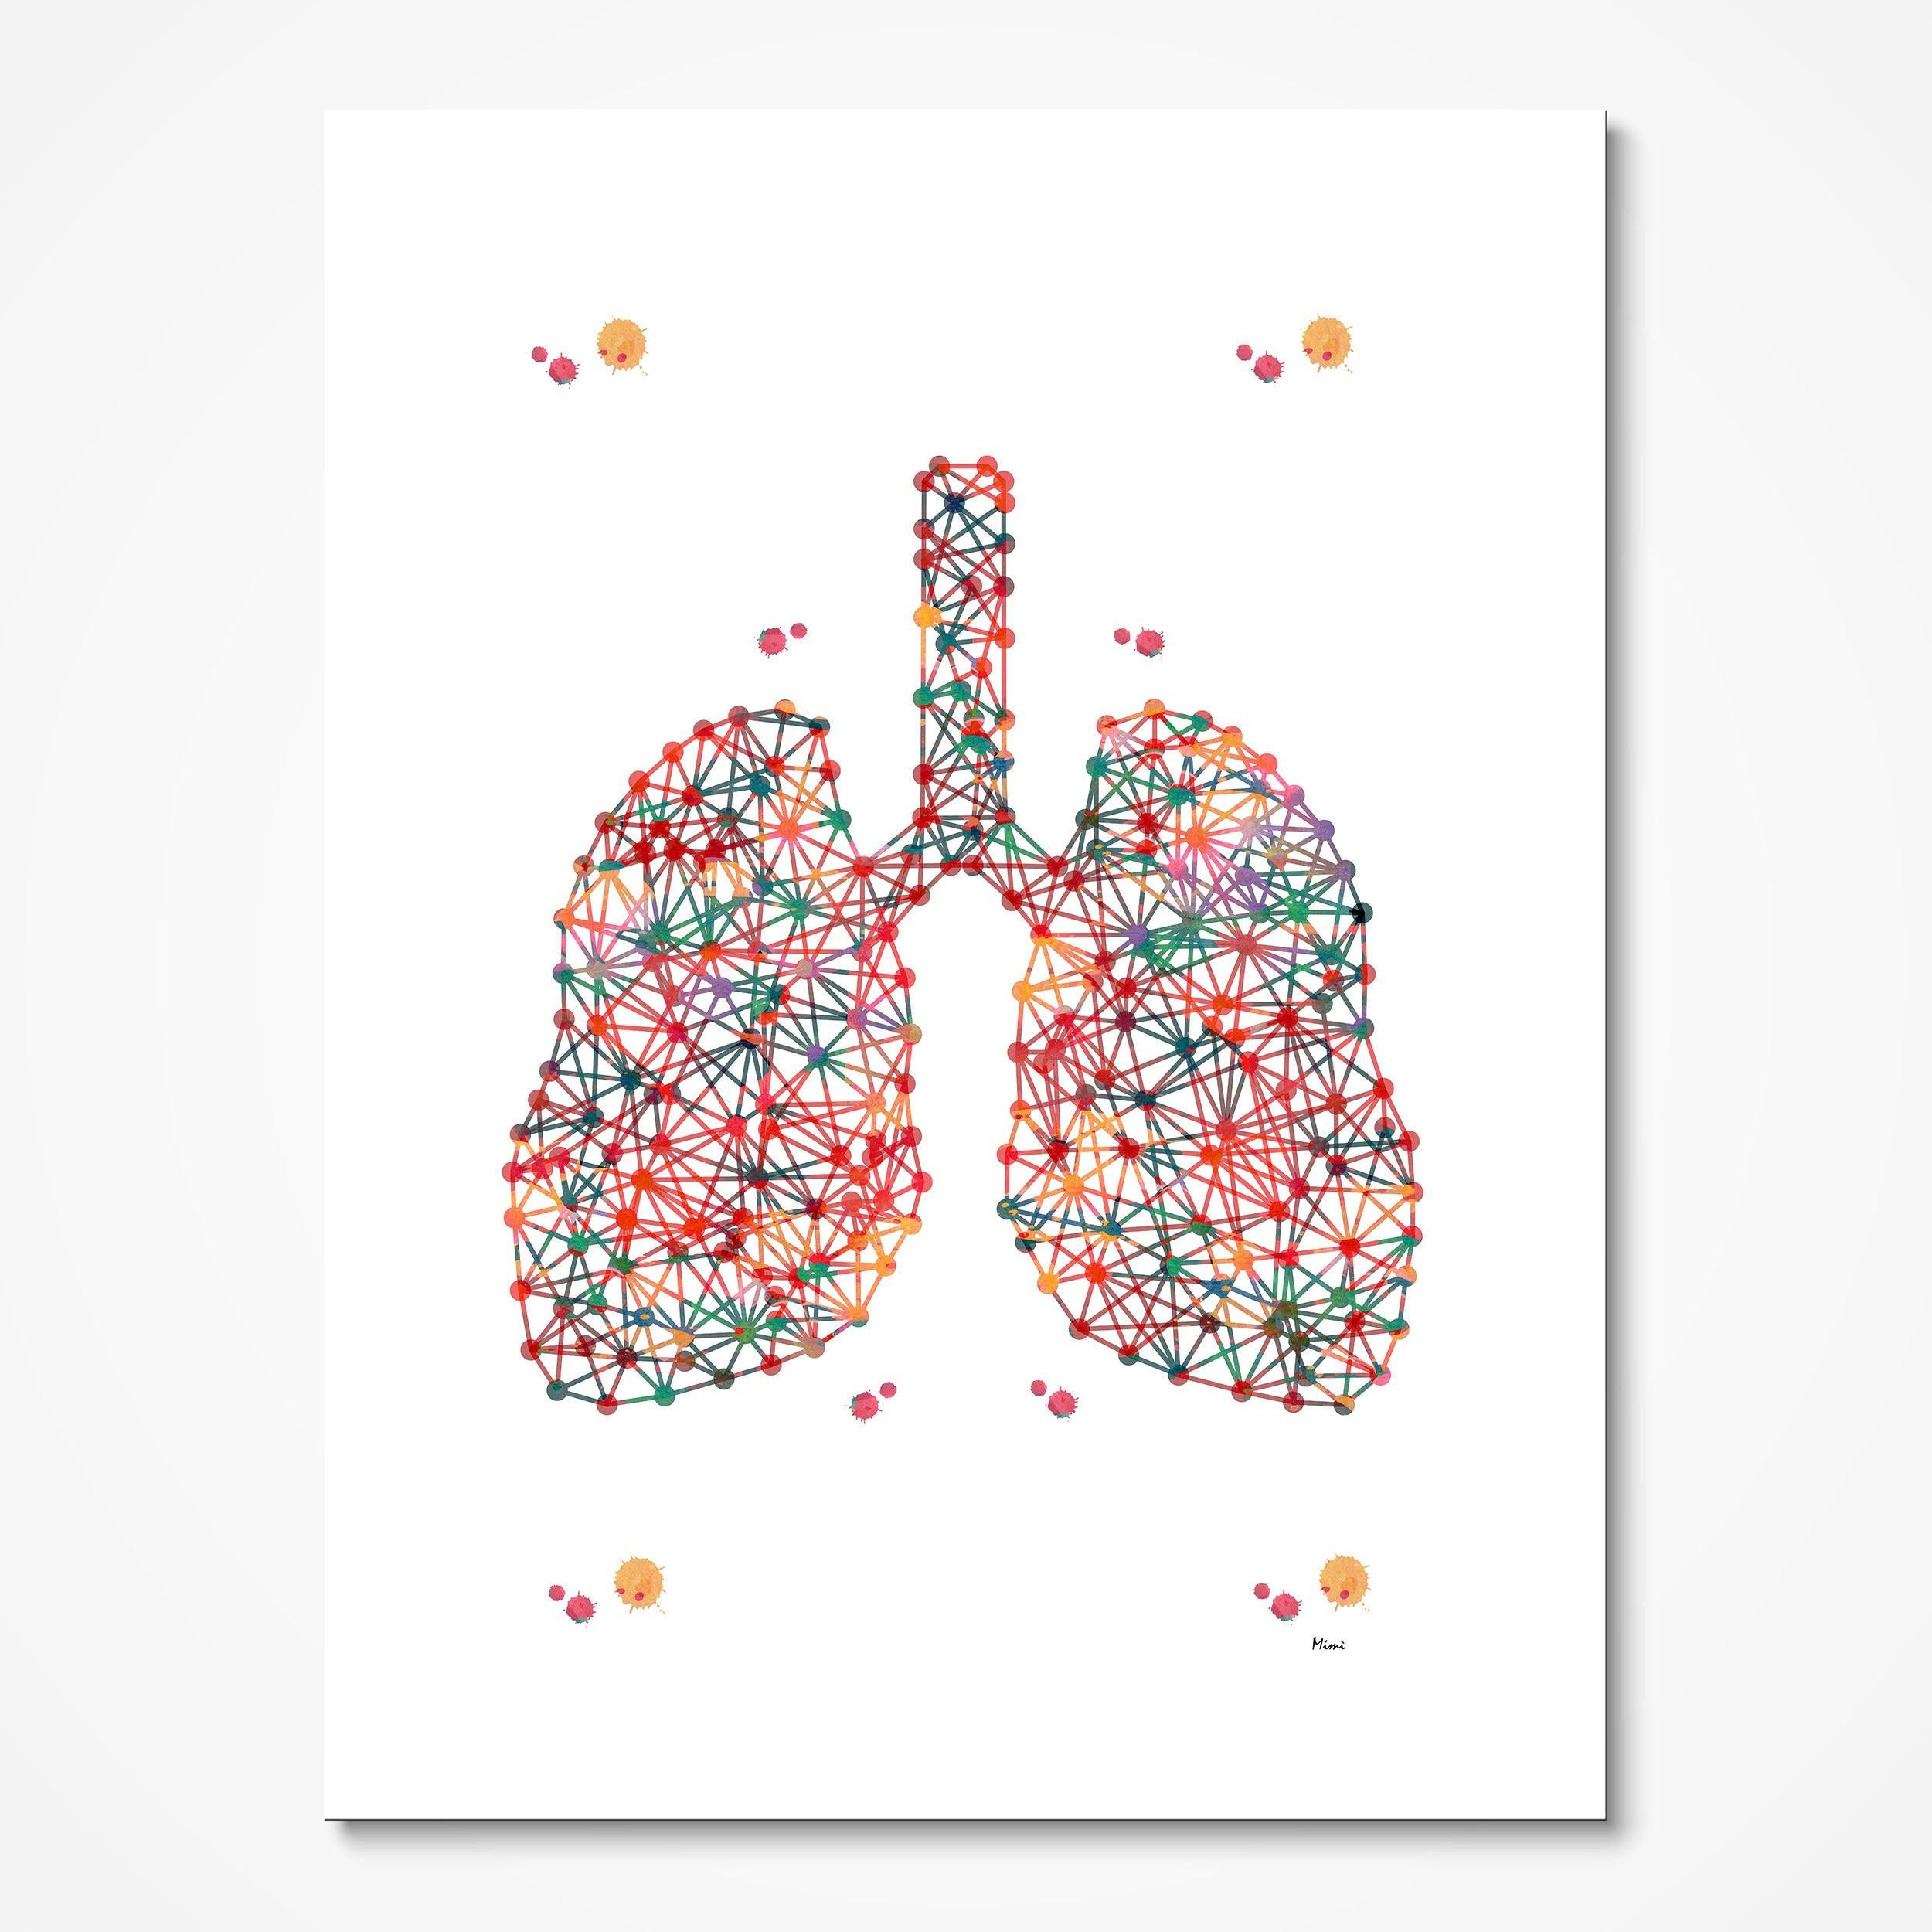 Lungs Abstract Anatomy Print Respiratory System Poster Human Organs Illustration Medicine Clinic Wall Decor